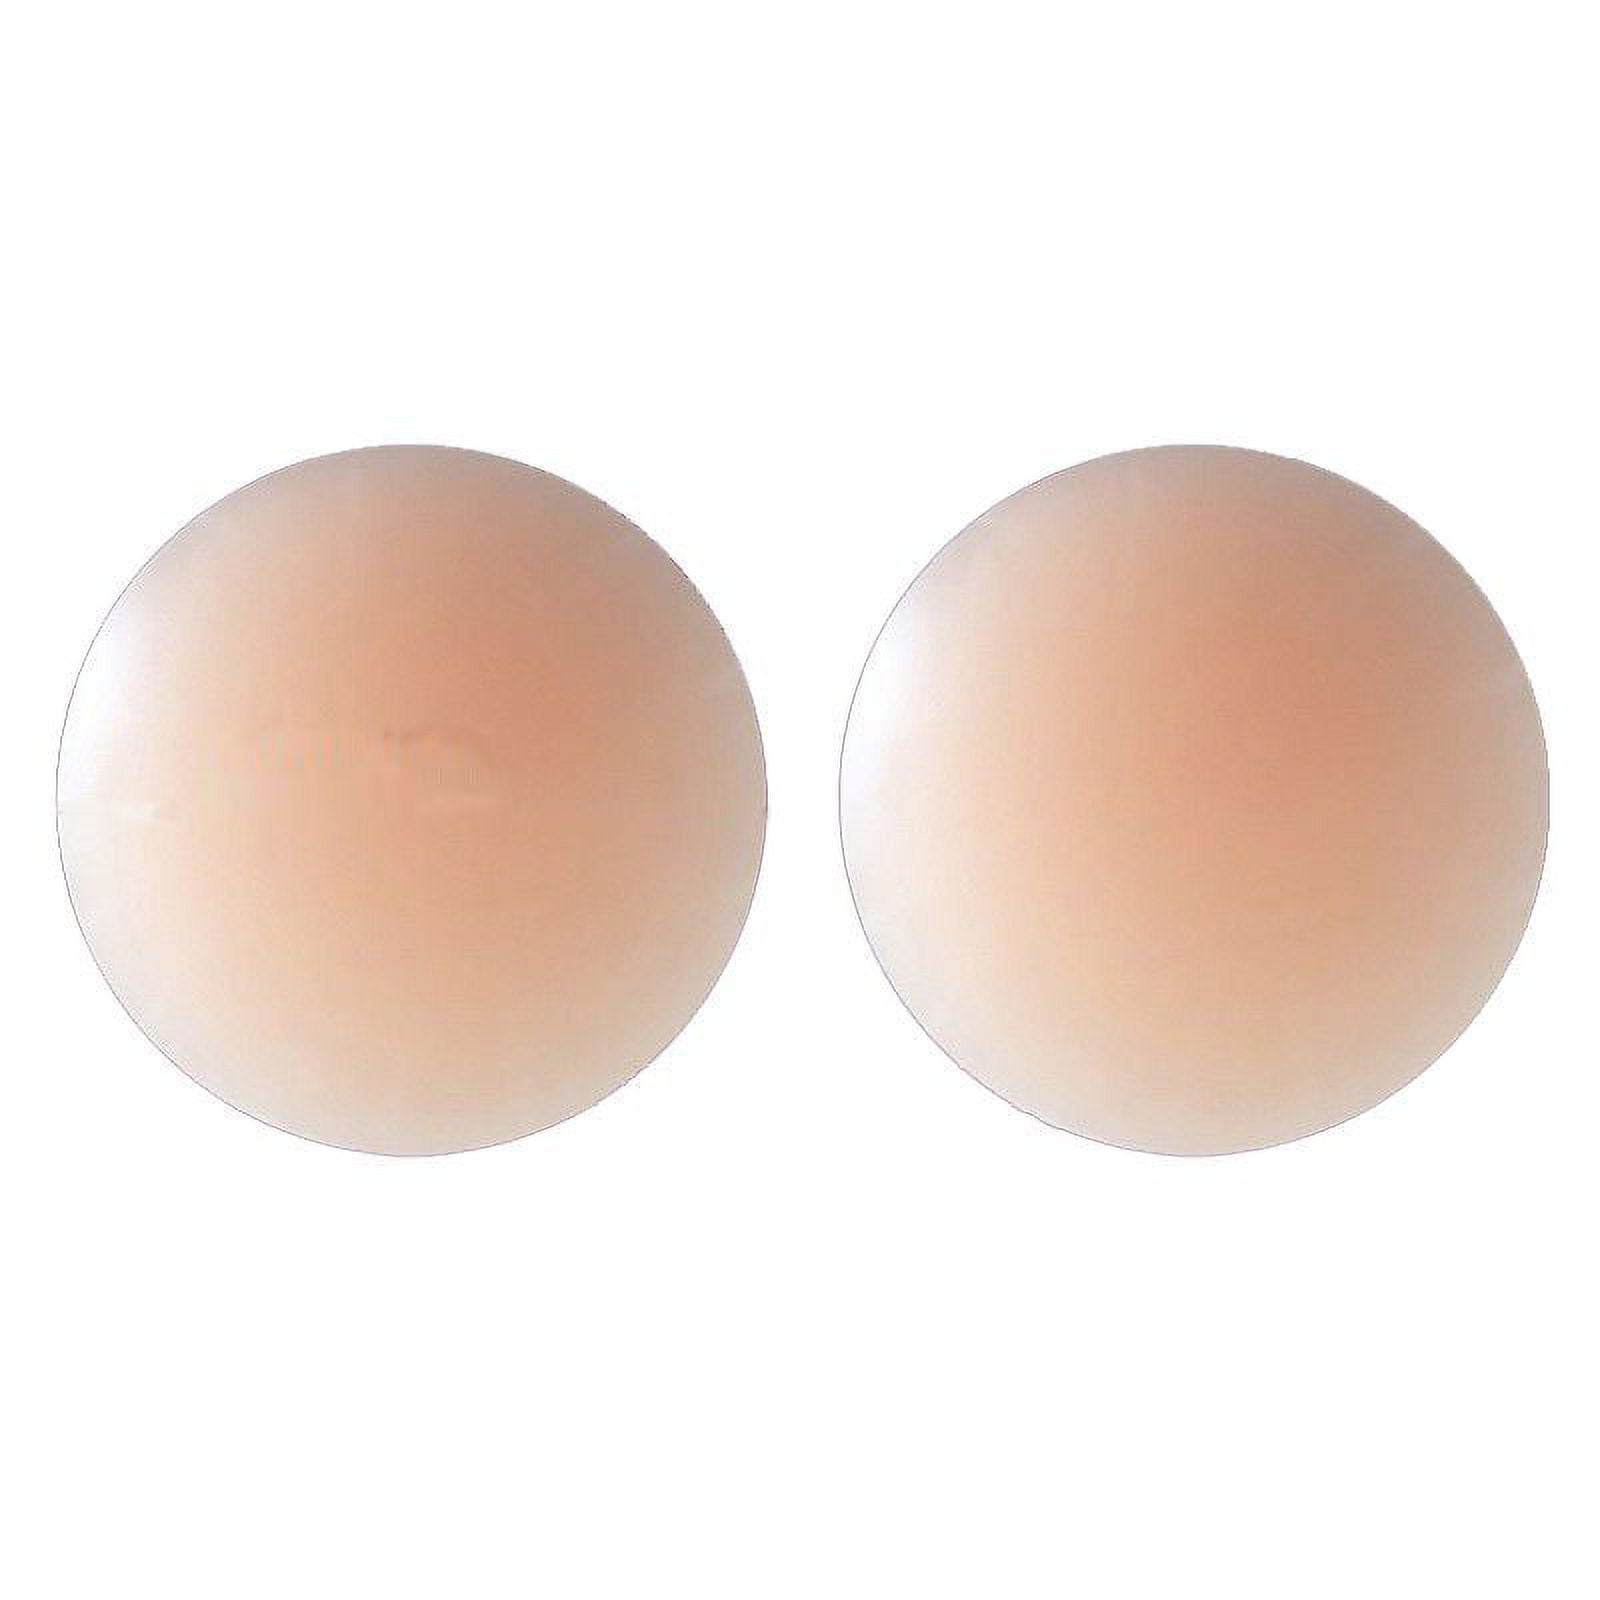 Nipplecovers Silicone Reusable Pasties for Women Skin Breast Petals  Adhesive Nipple Cover